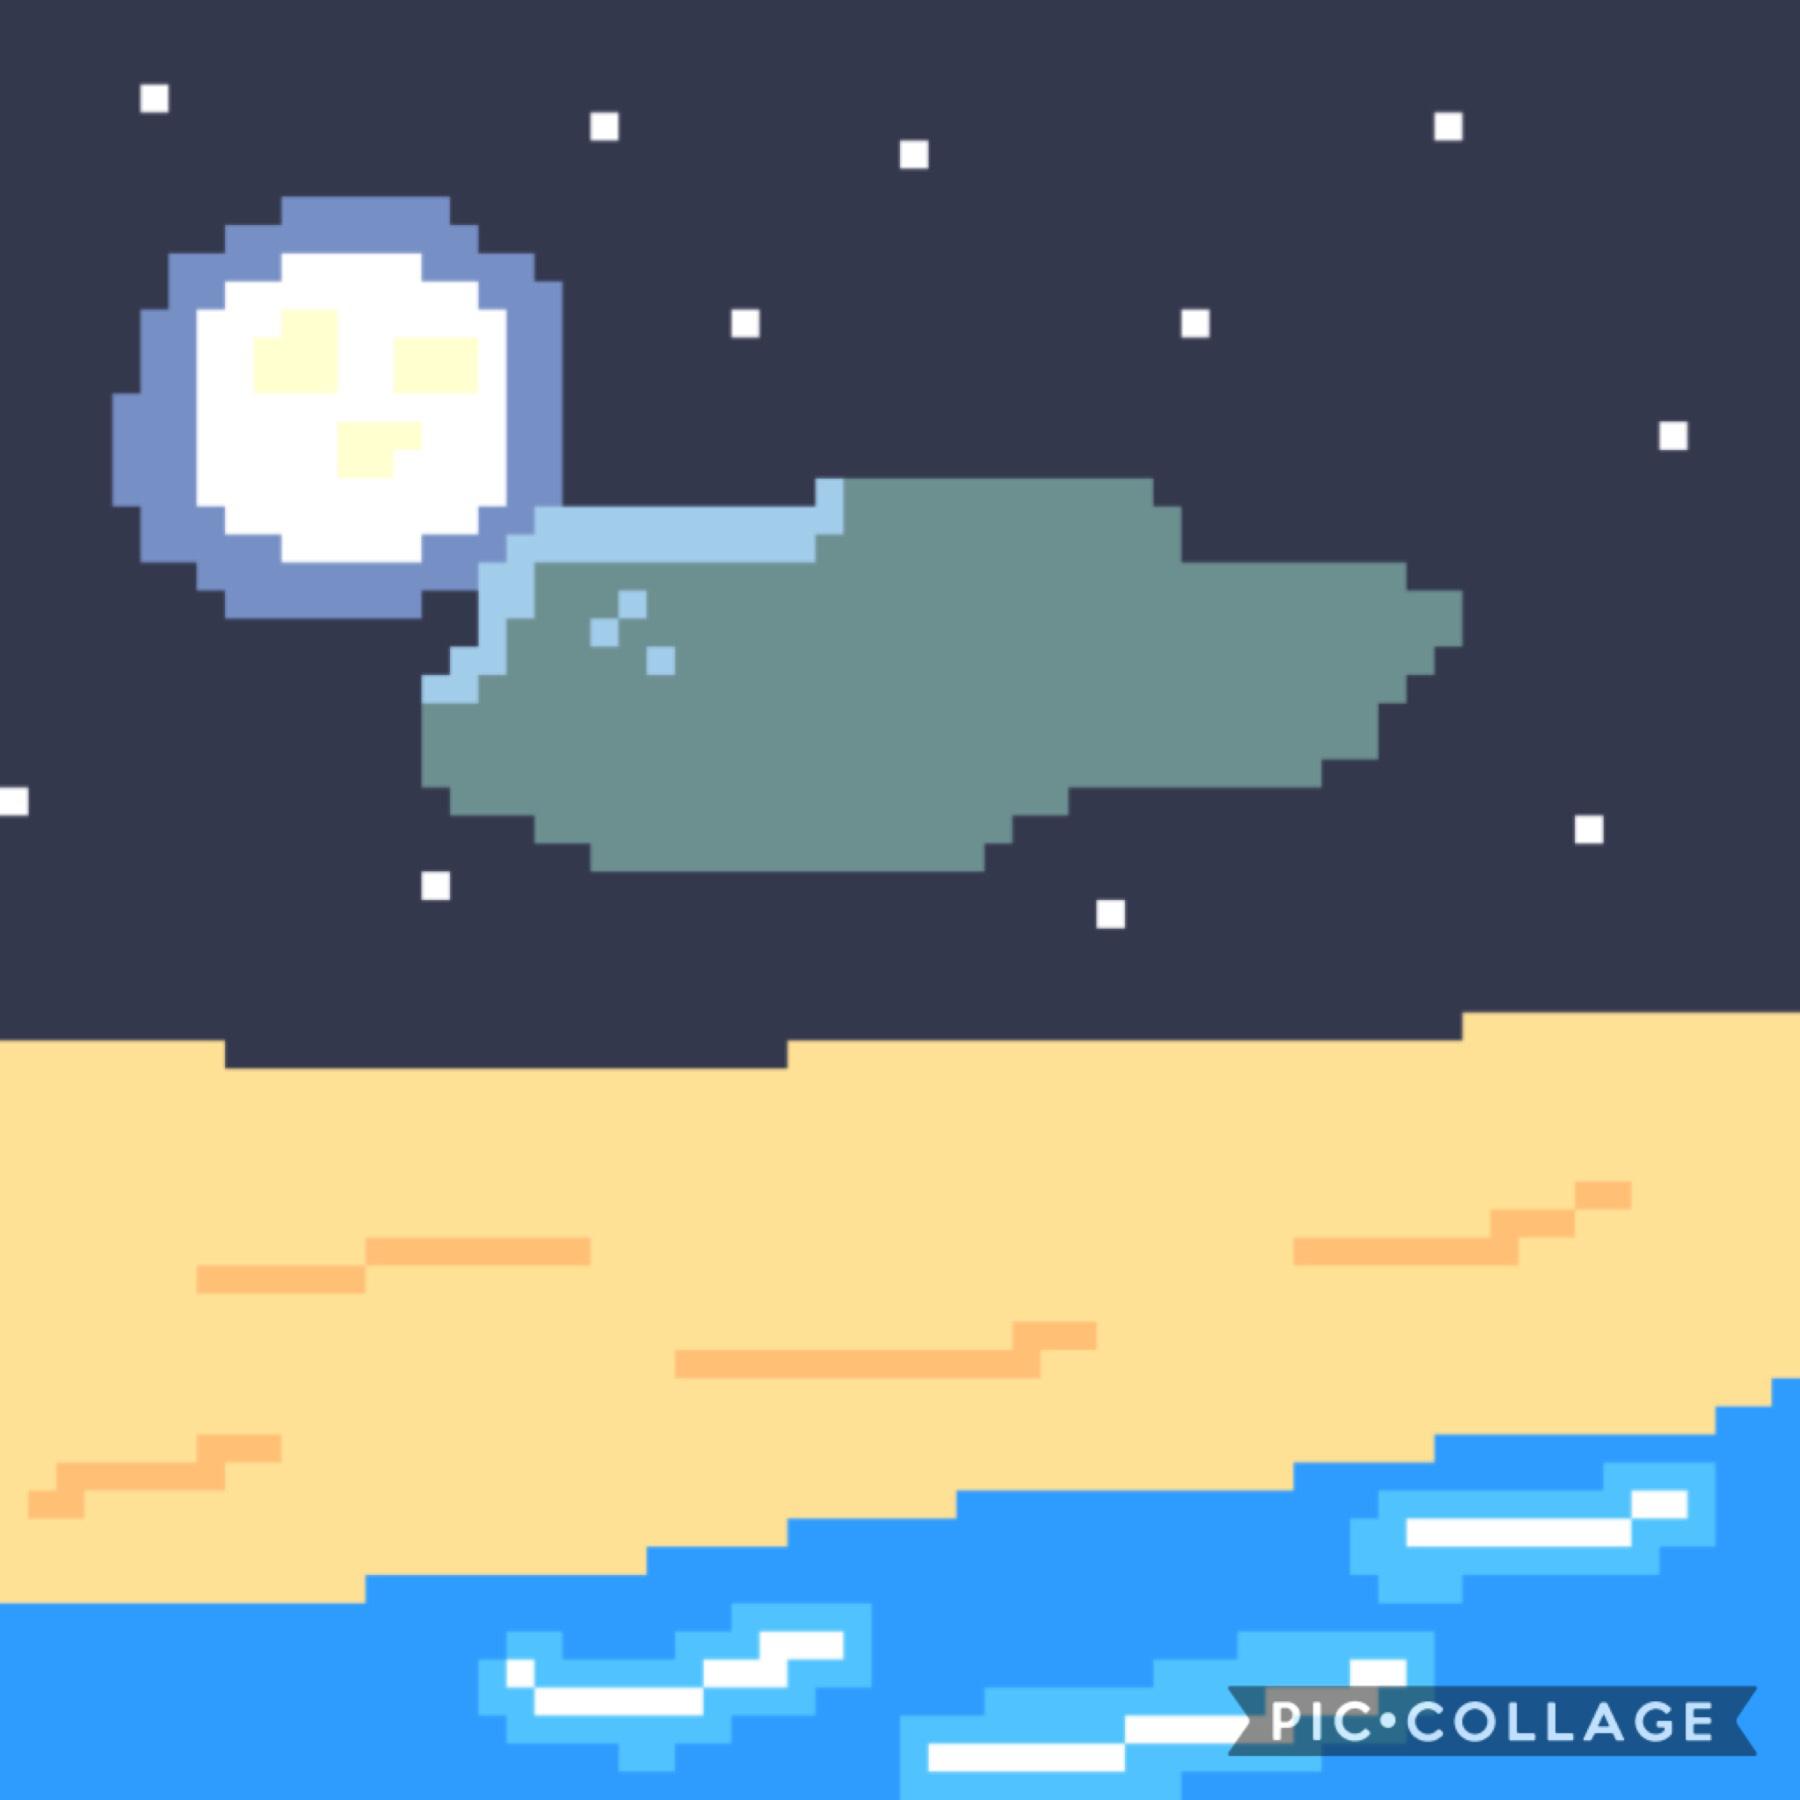 I learned how to do pixel art yay